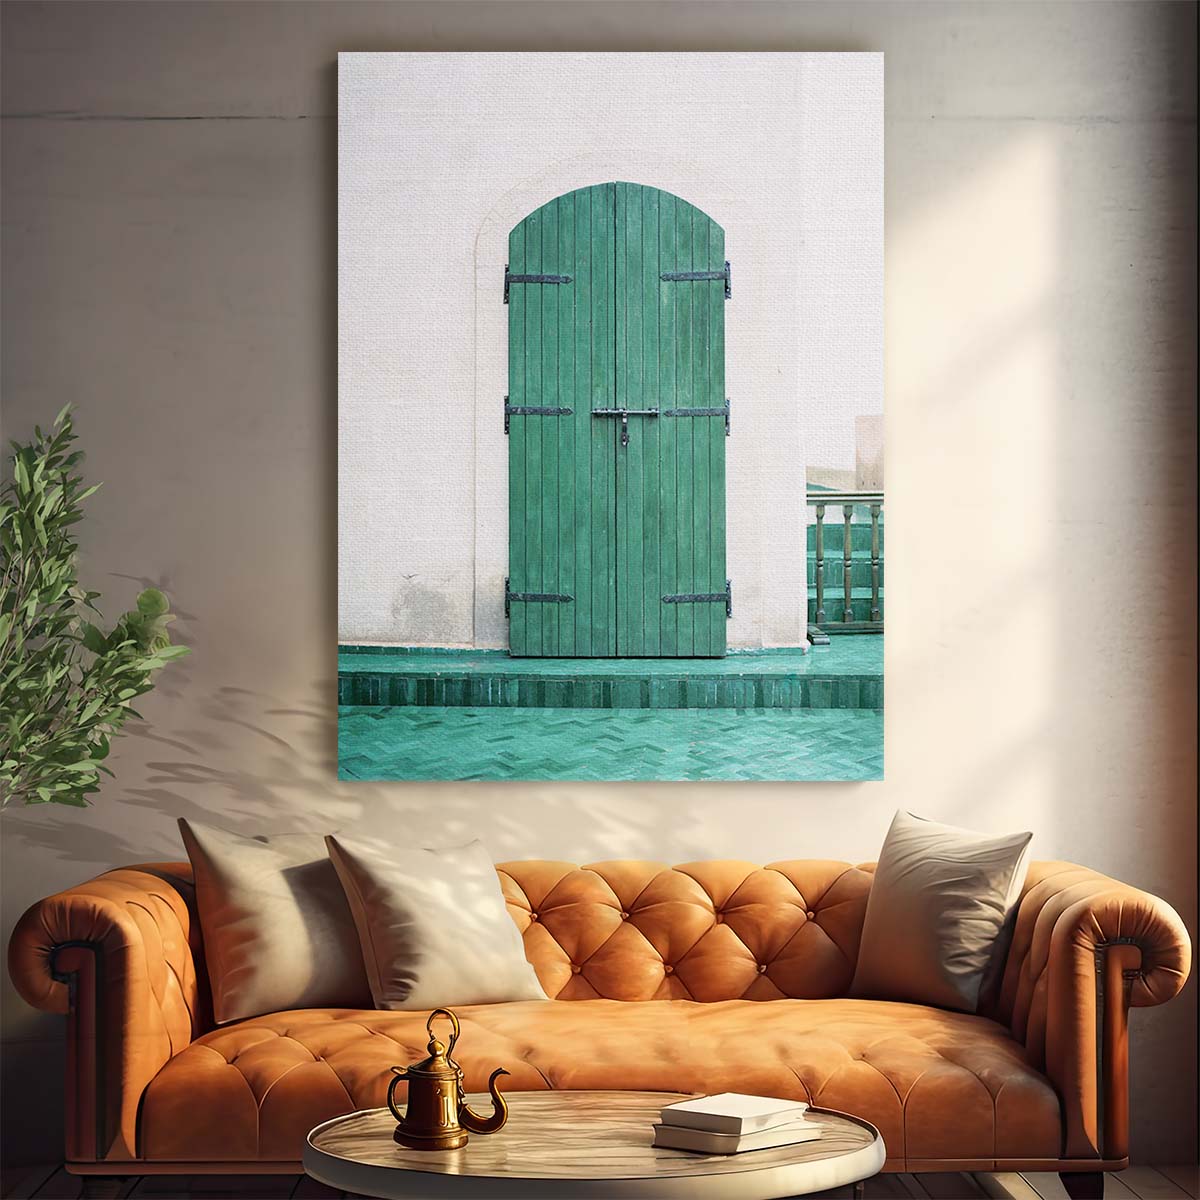 Colourful Marrakesh Doorway Photography - Moroccan Urban Architecture Wall Art by Luxuriance Designs, made in USA